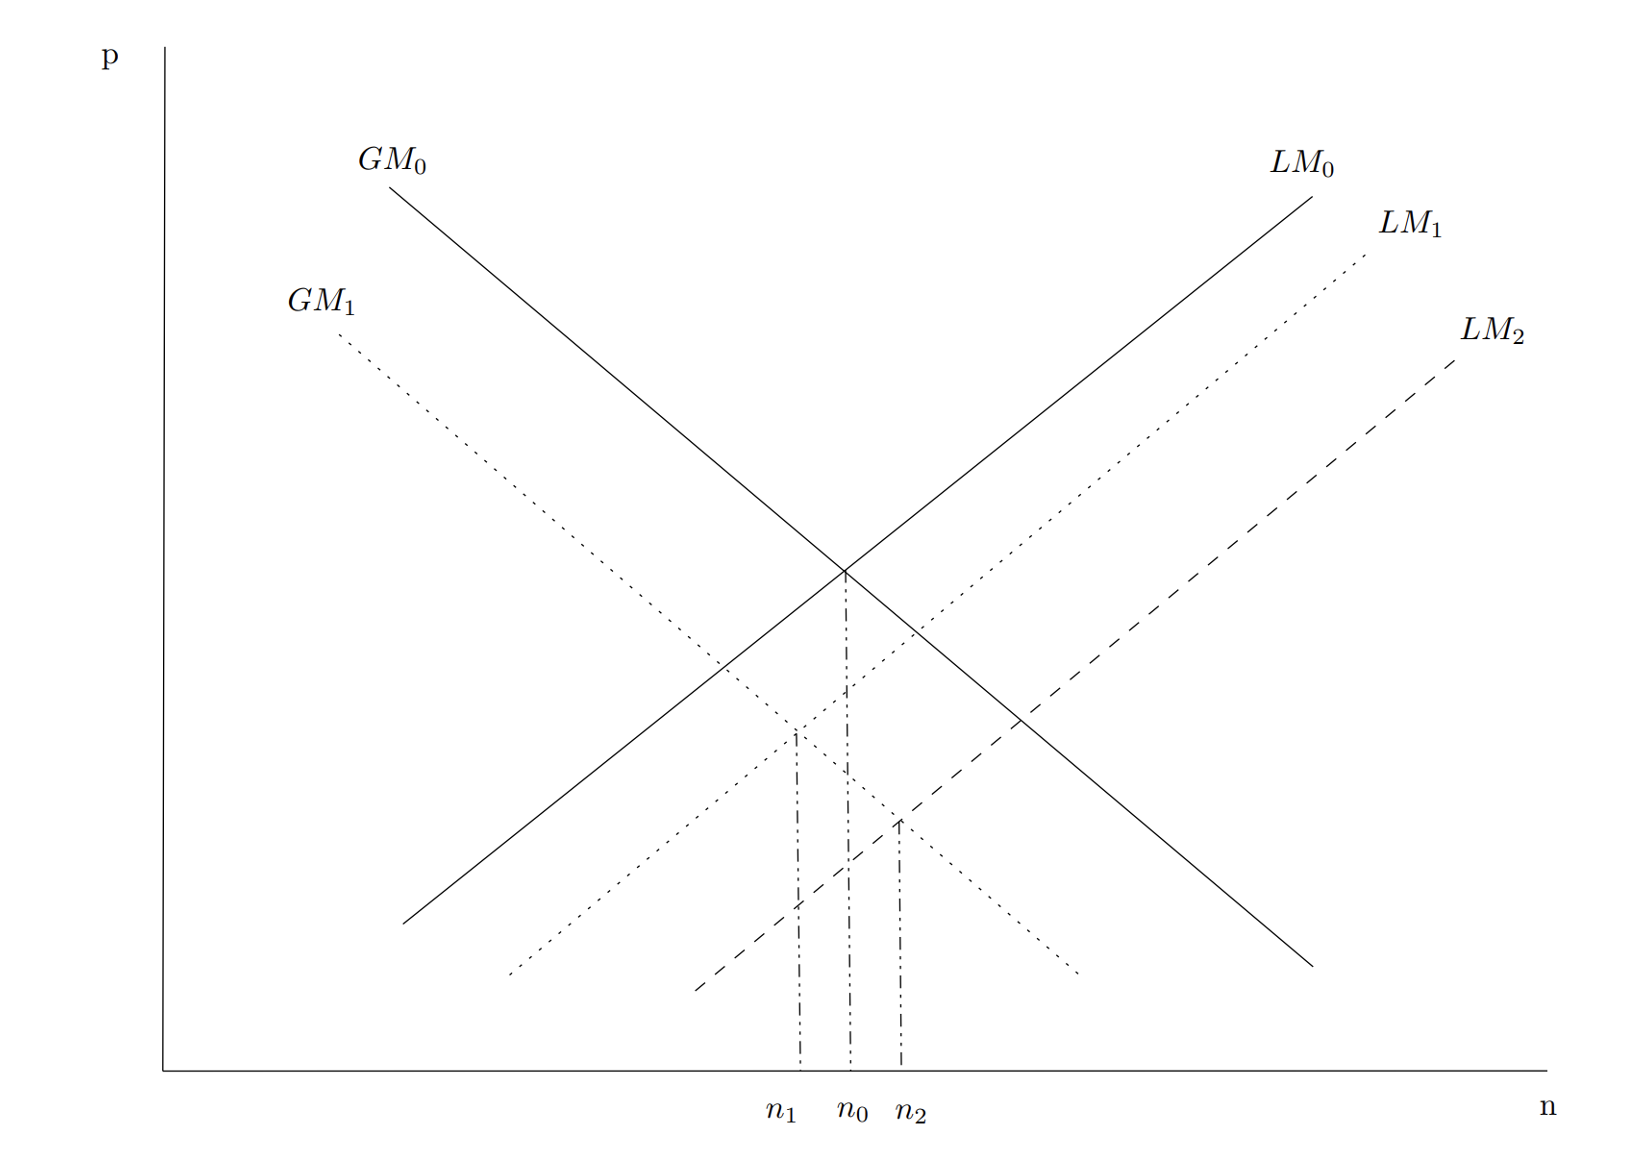 Figure 2 Goods and labor market equilibrium on relative price (p) and employment (n) plane